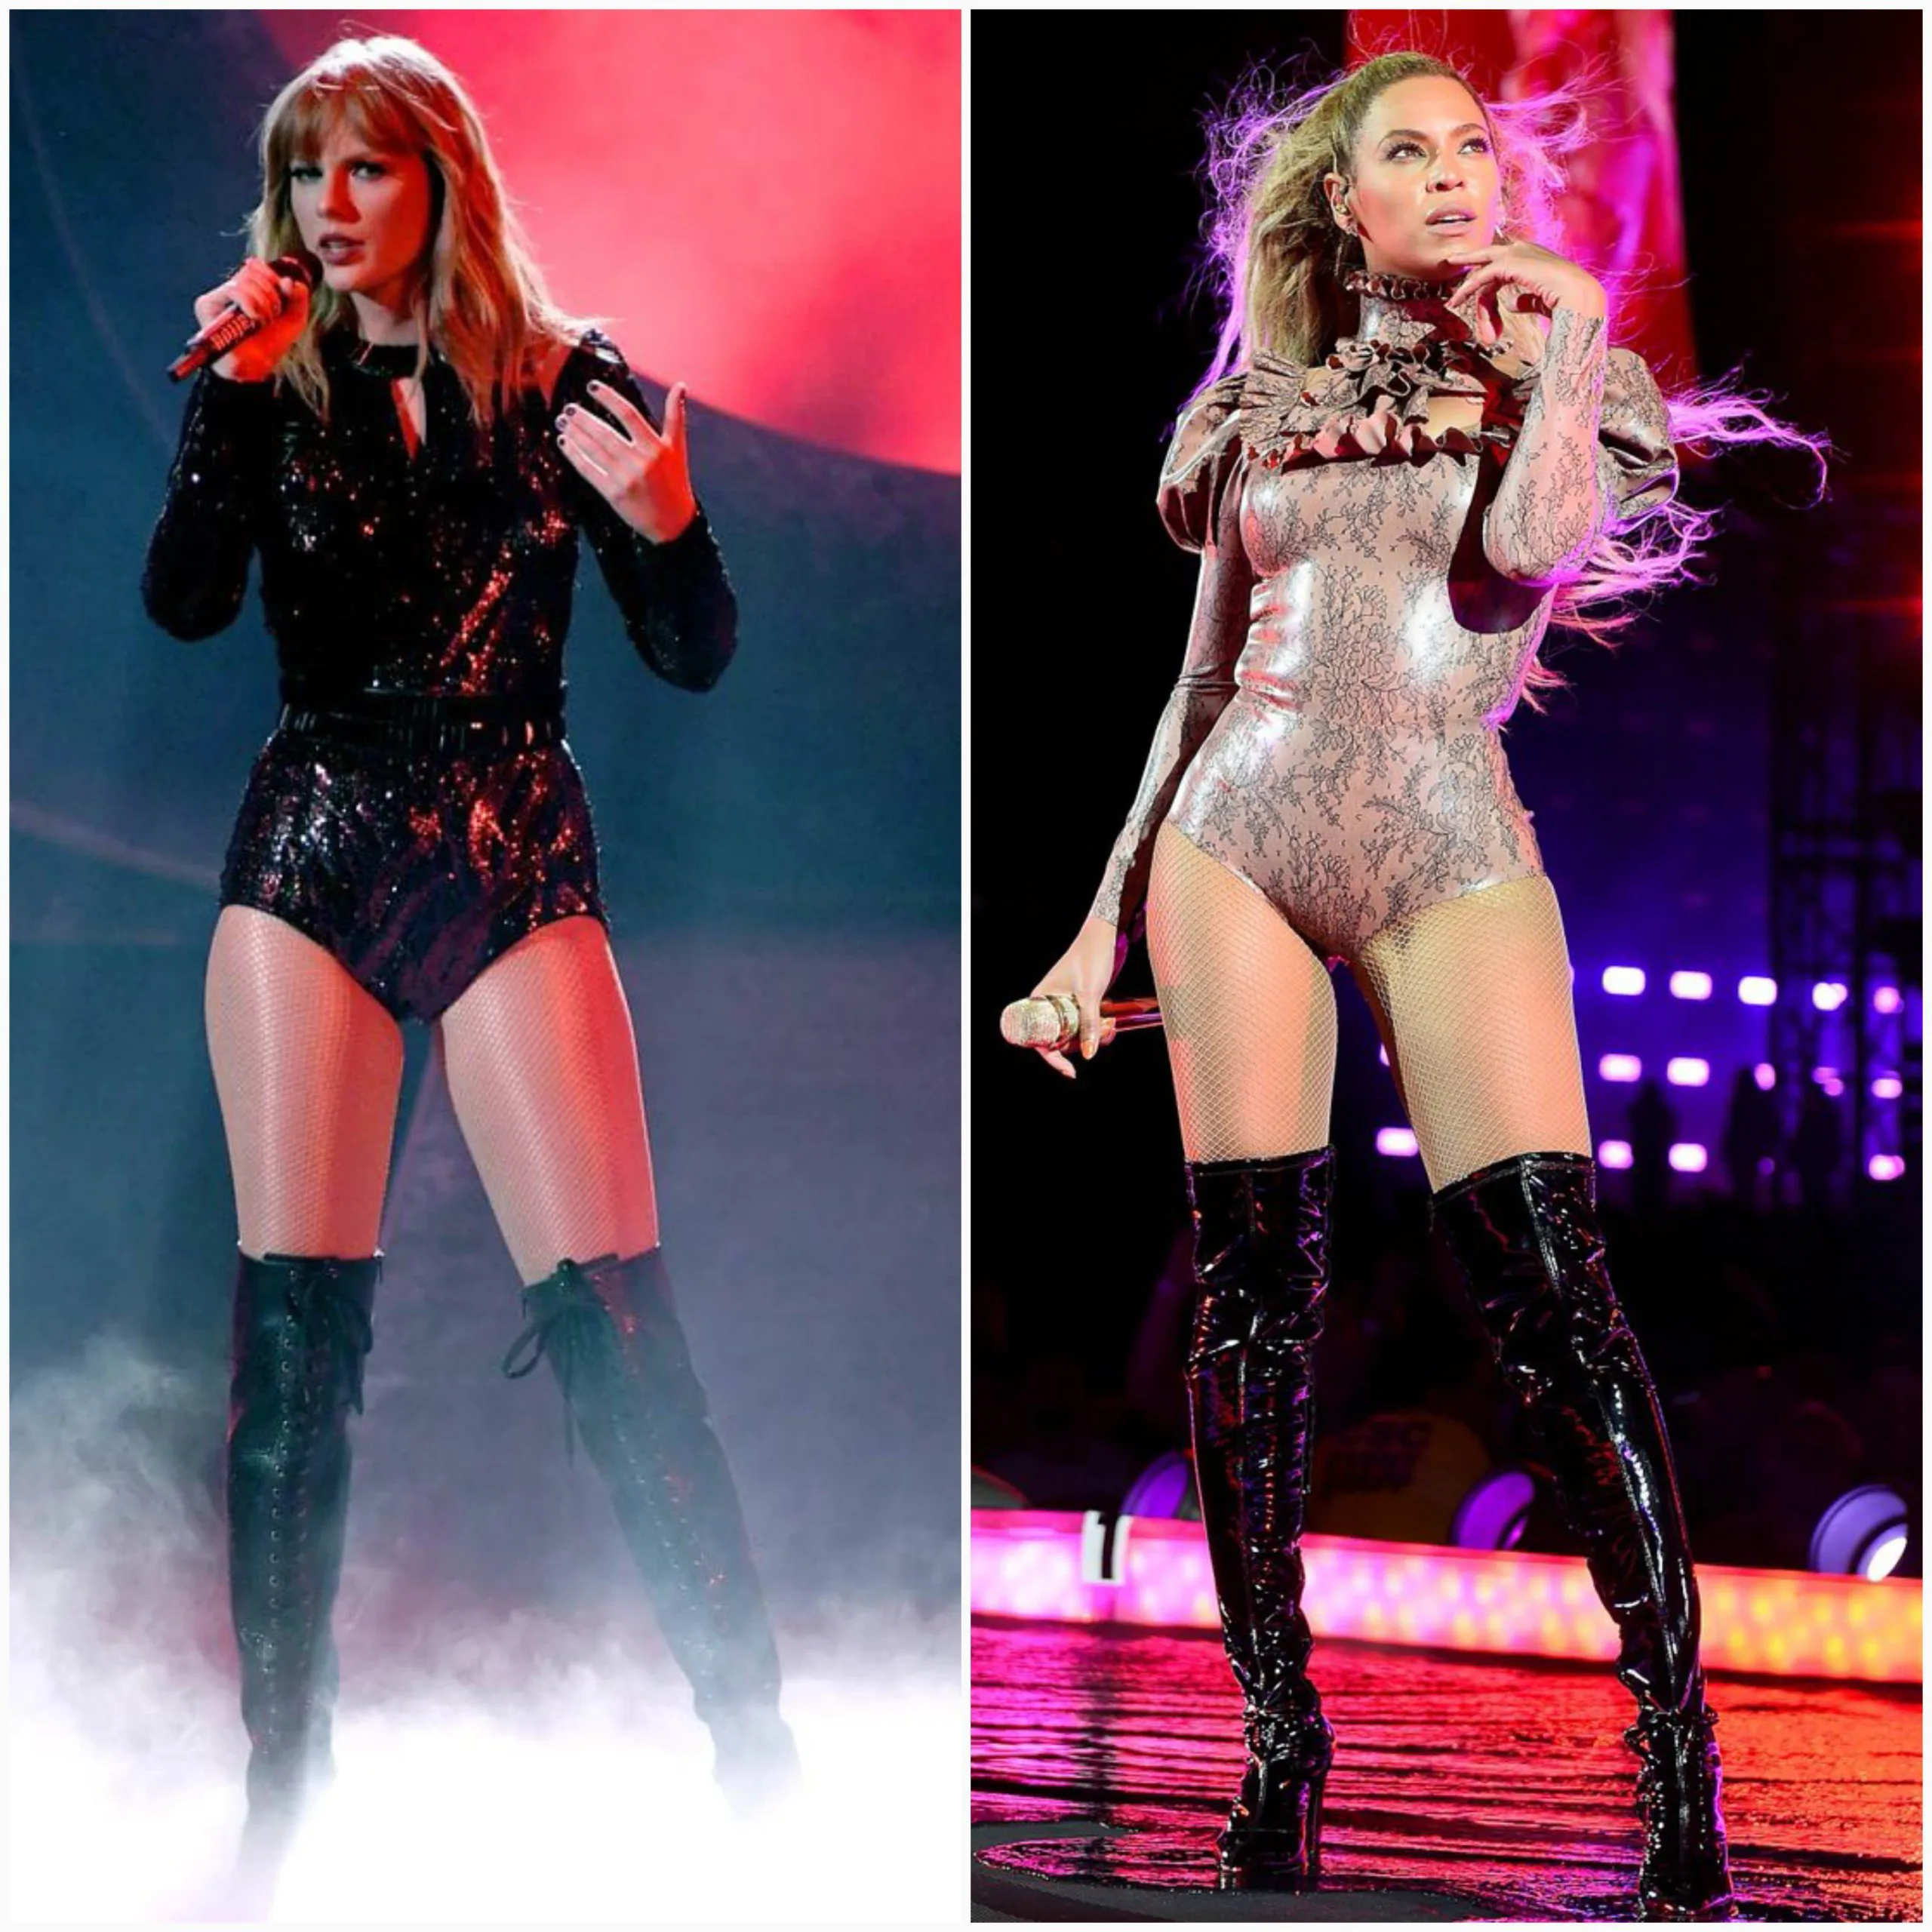 Top Seven Reasons Black People Need to Confess Taylor Swift is Better Than Beyonce